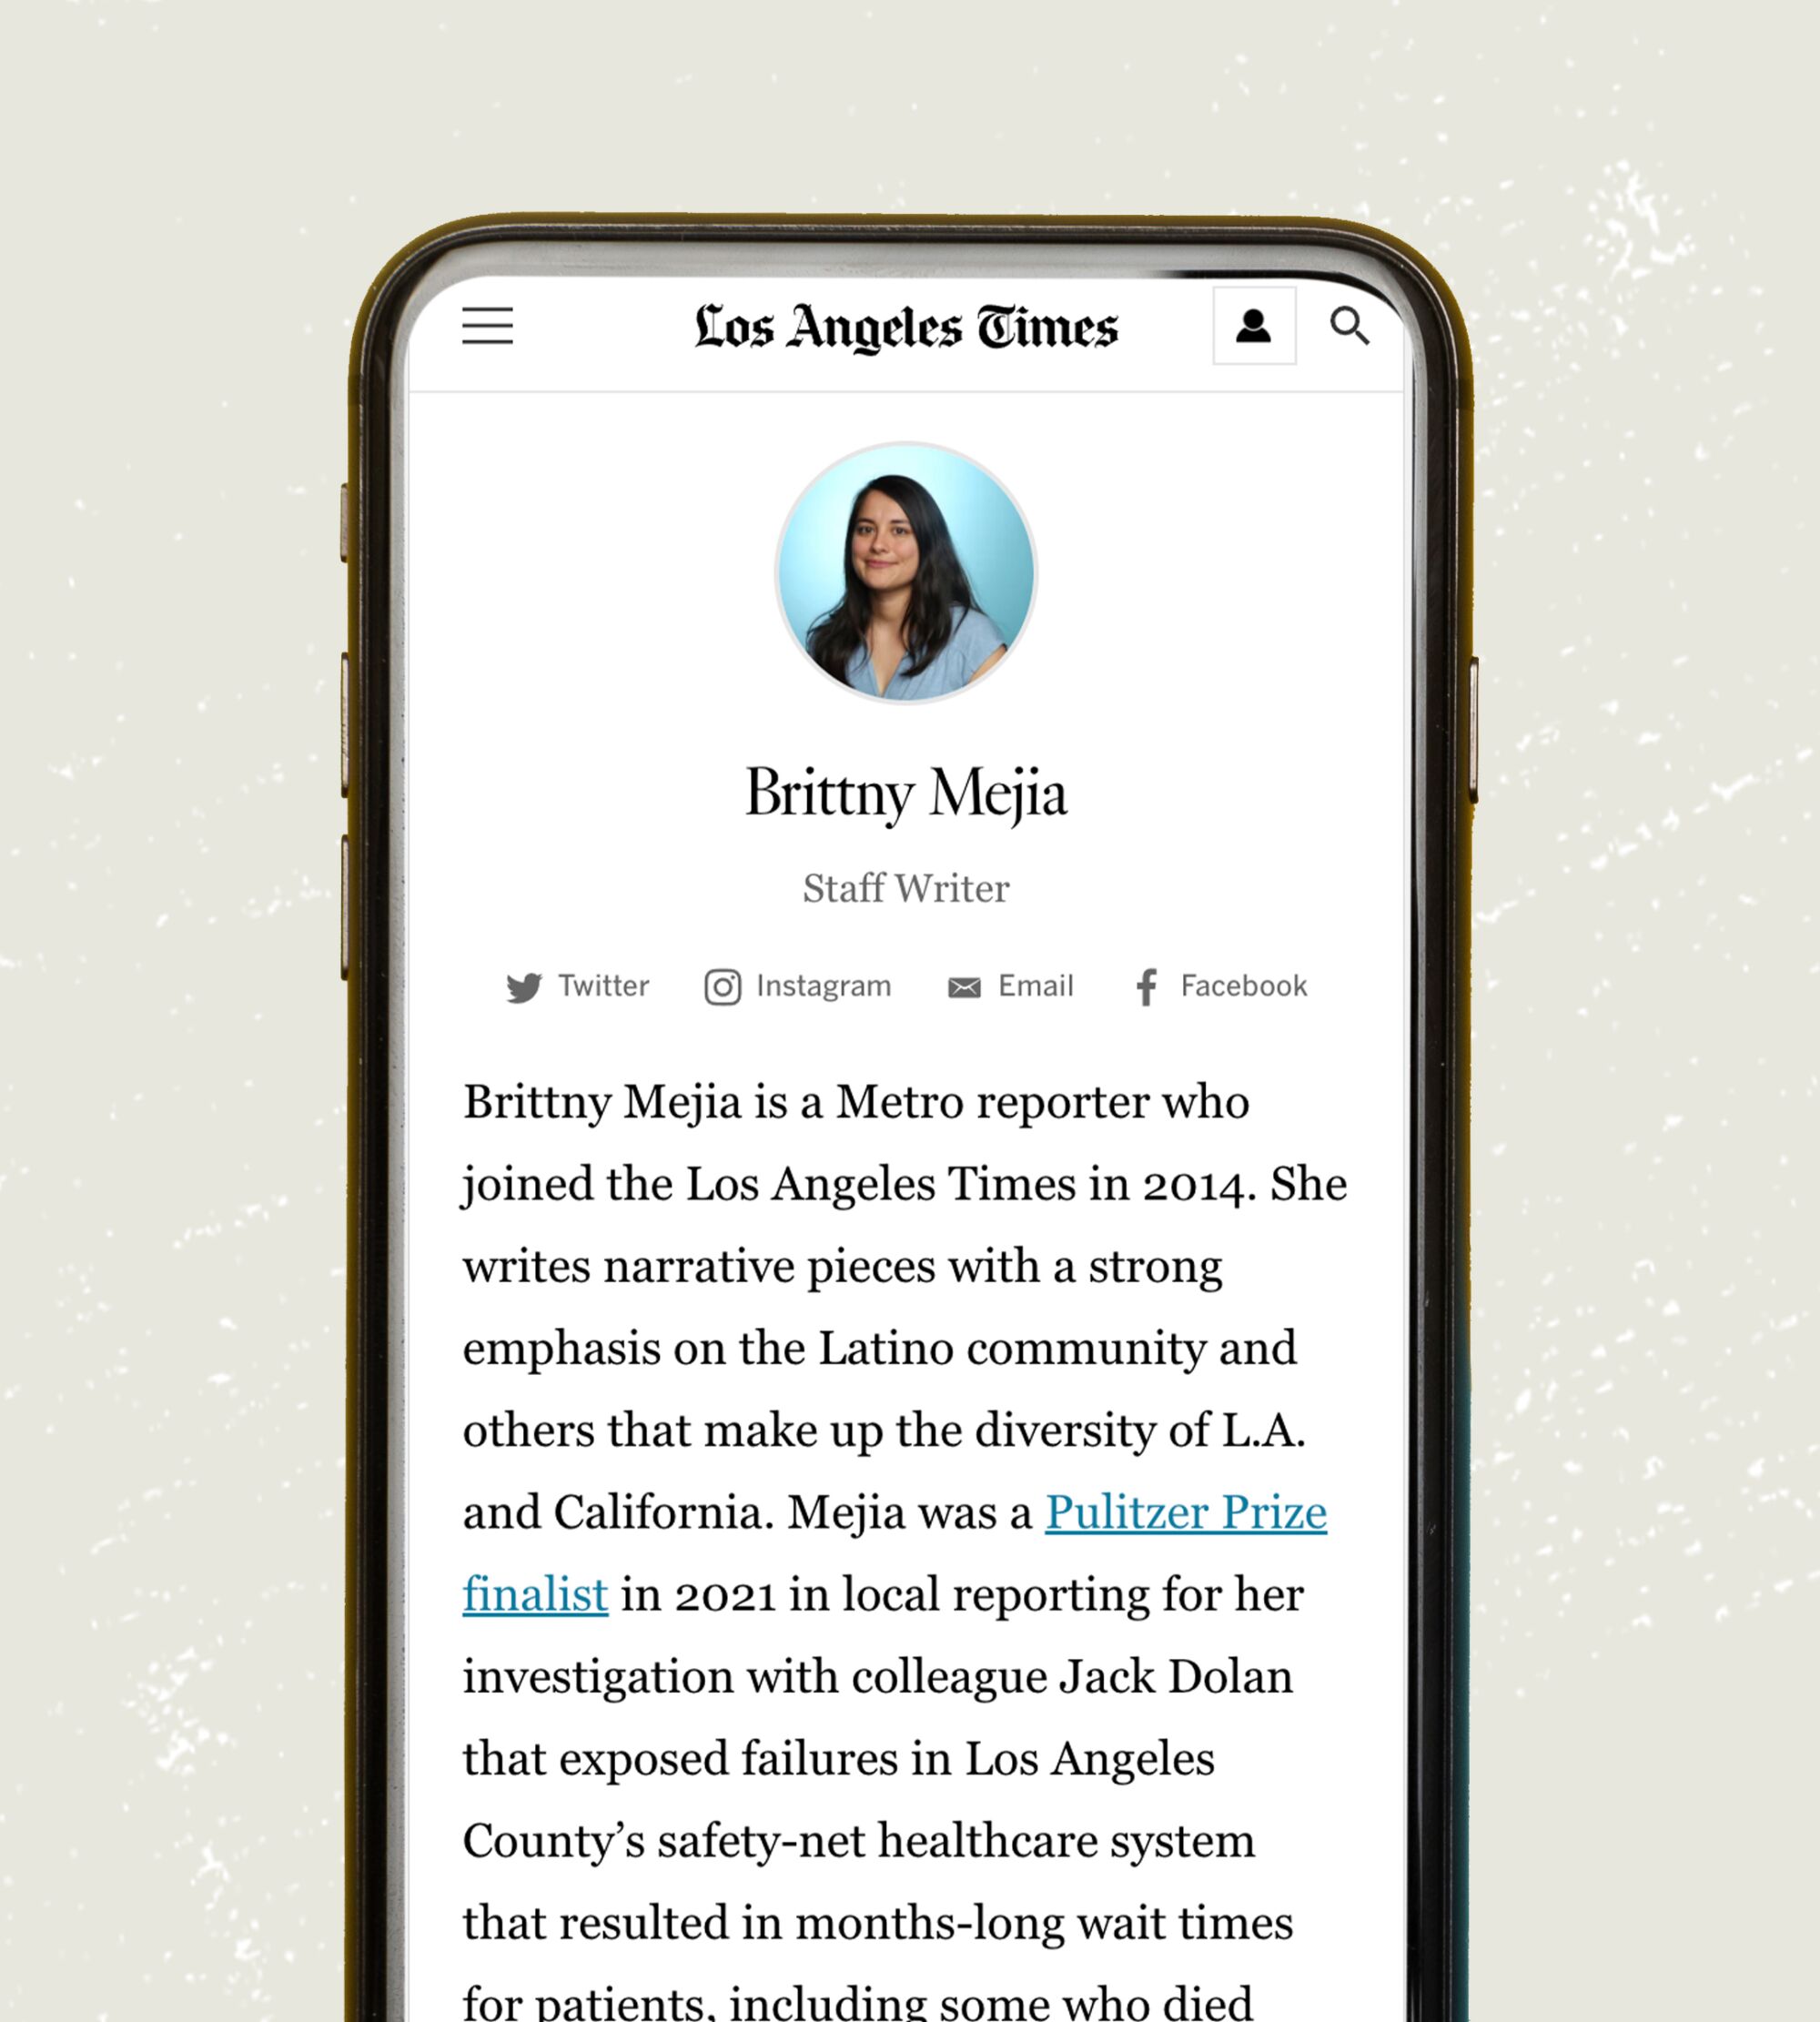 Brittny Mejia's LA Times bio on a phone screen. "Brittny Mejia is a Metro reporter who joined the Los Angeles Times in 2014."